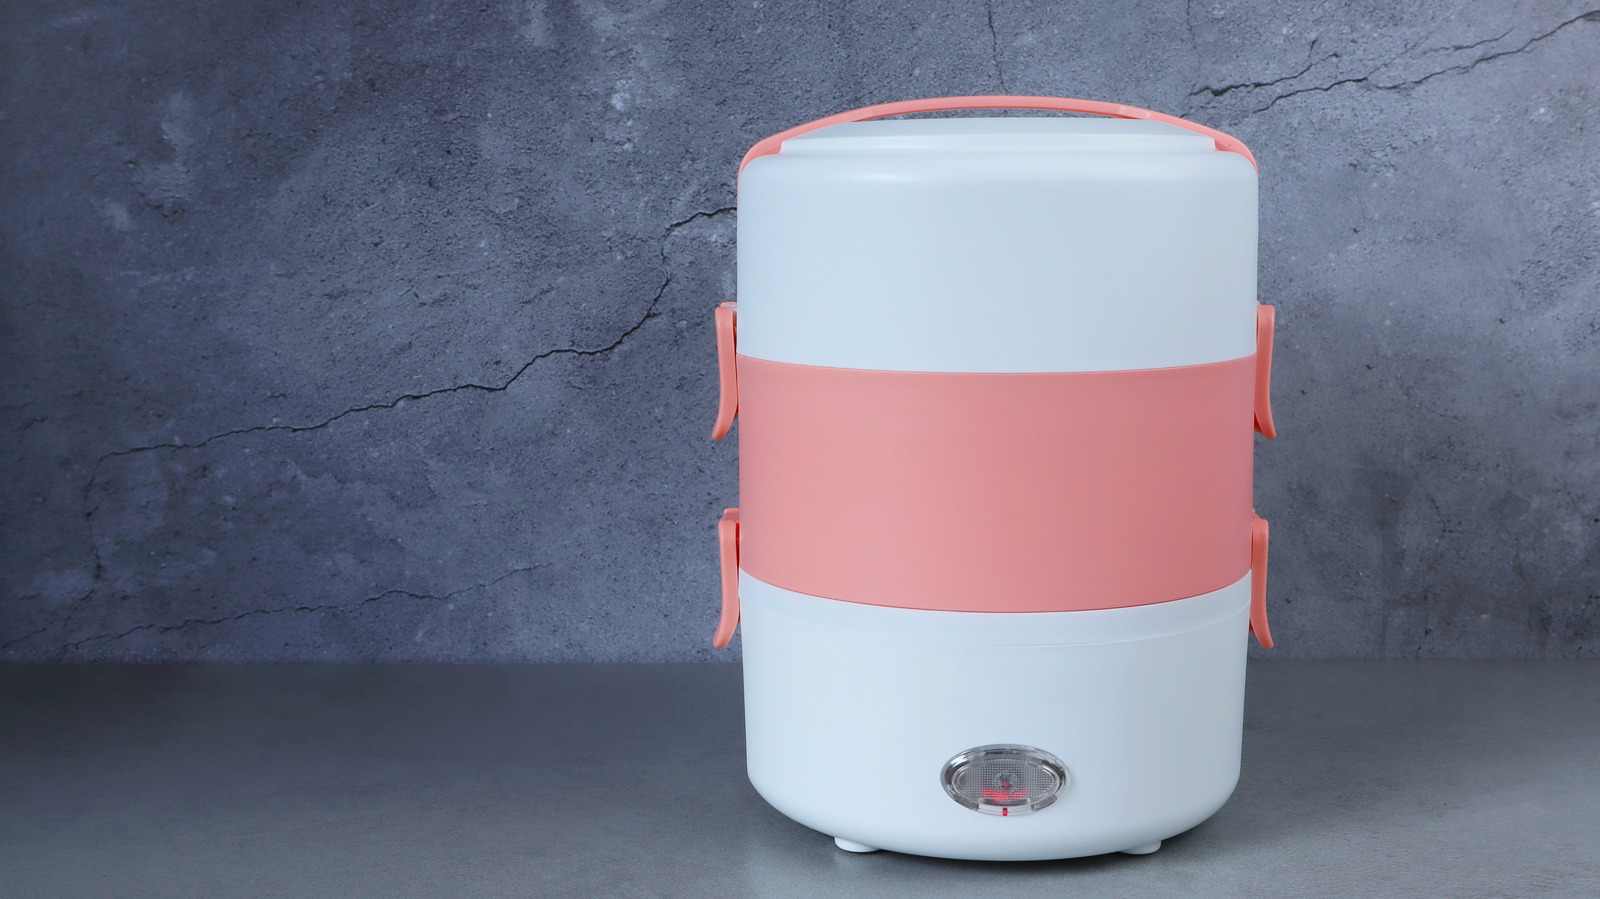 LOOK: This Electric Lunch Box Will Keep Your Food Warm